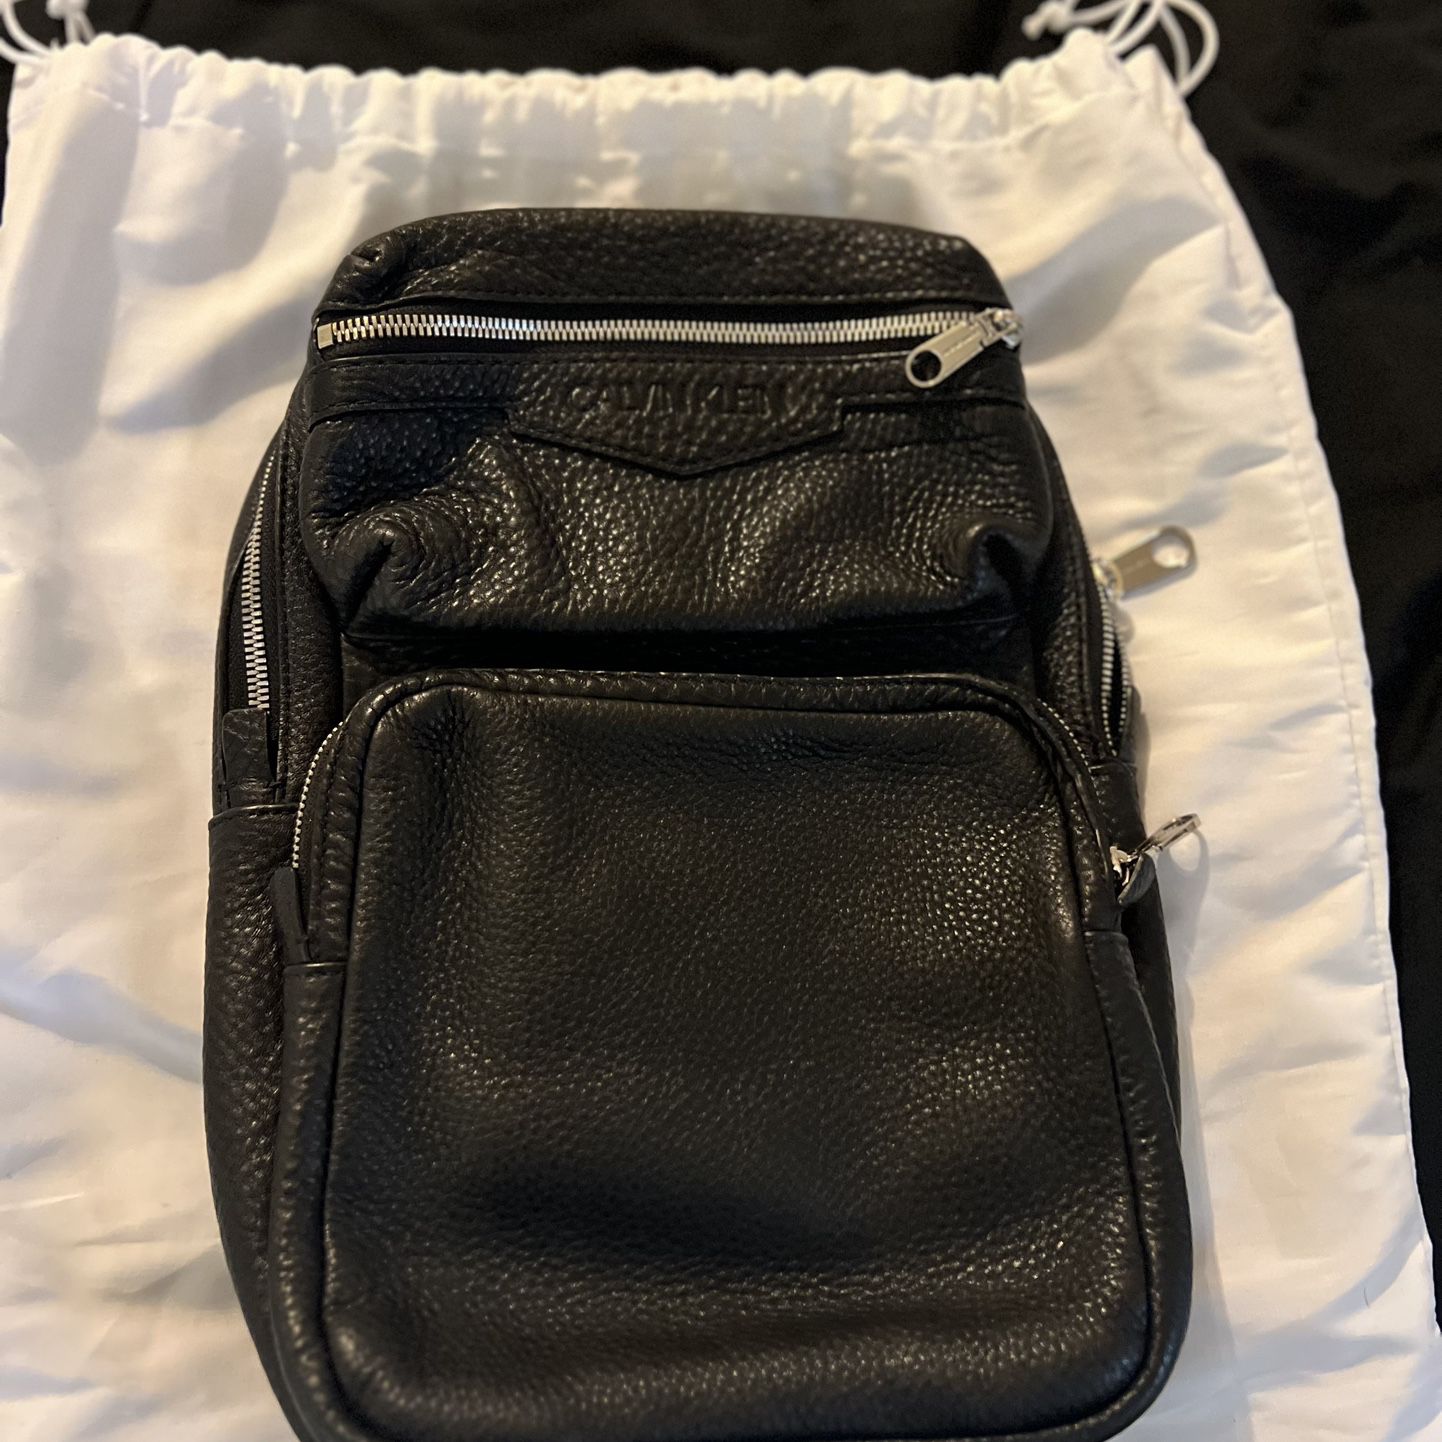 Calvin Klein Jeans Pebbled leather bag